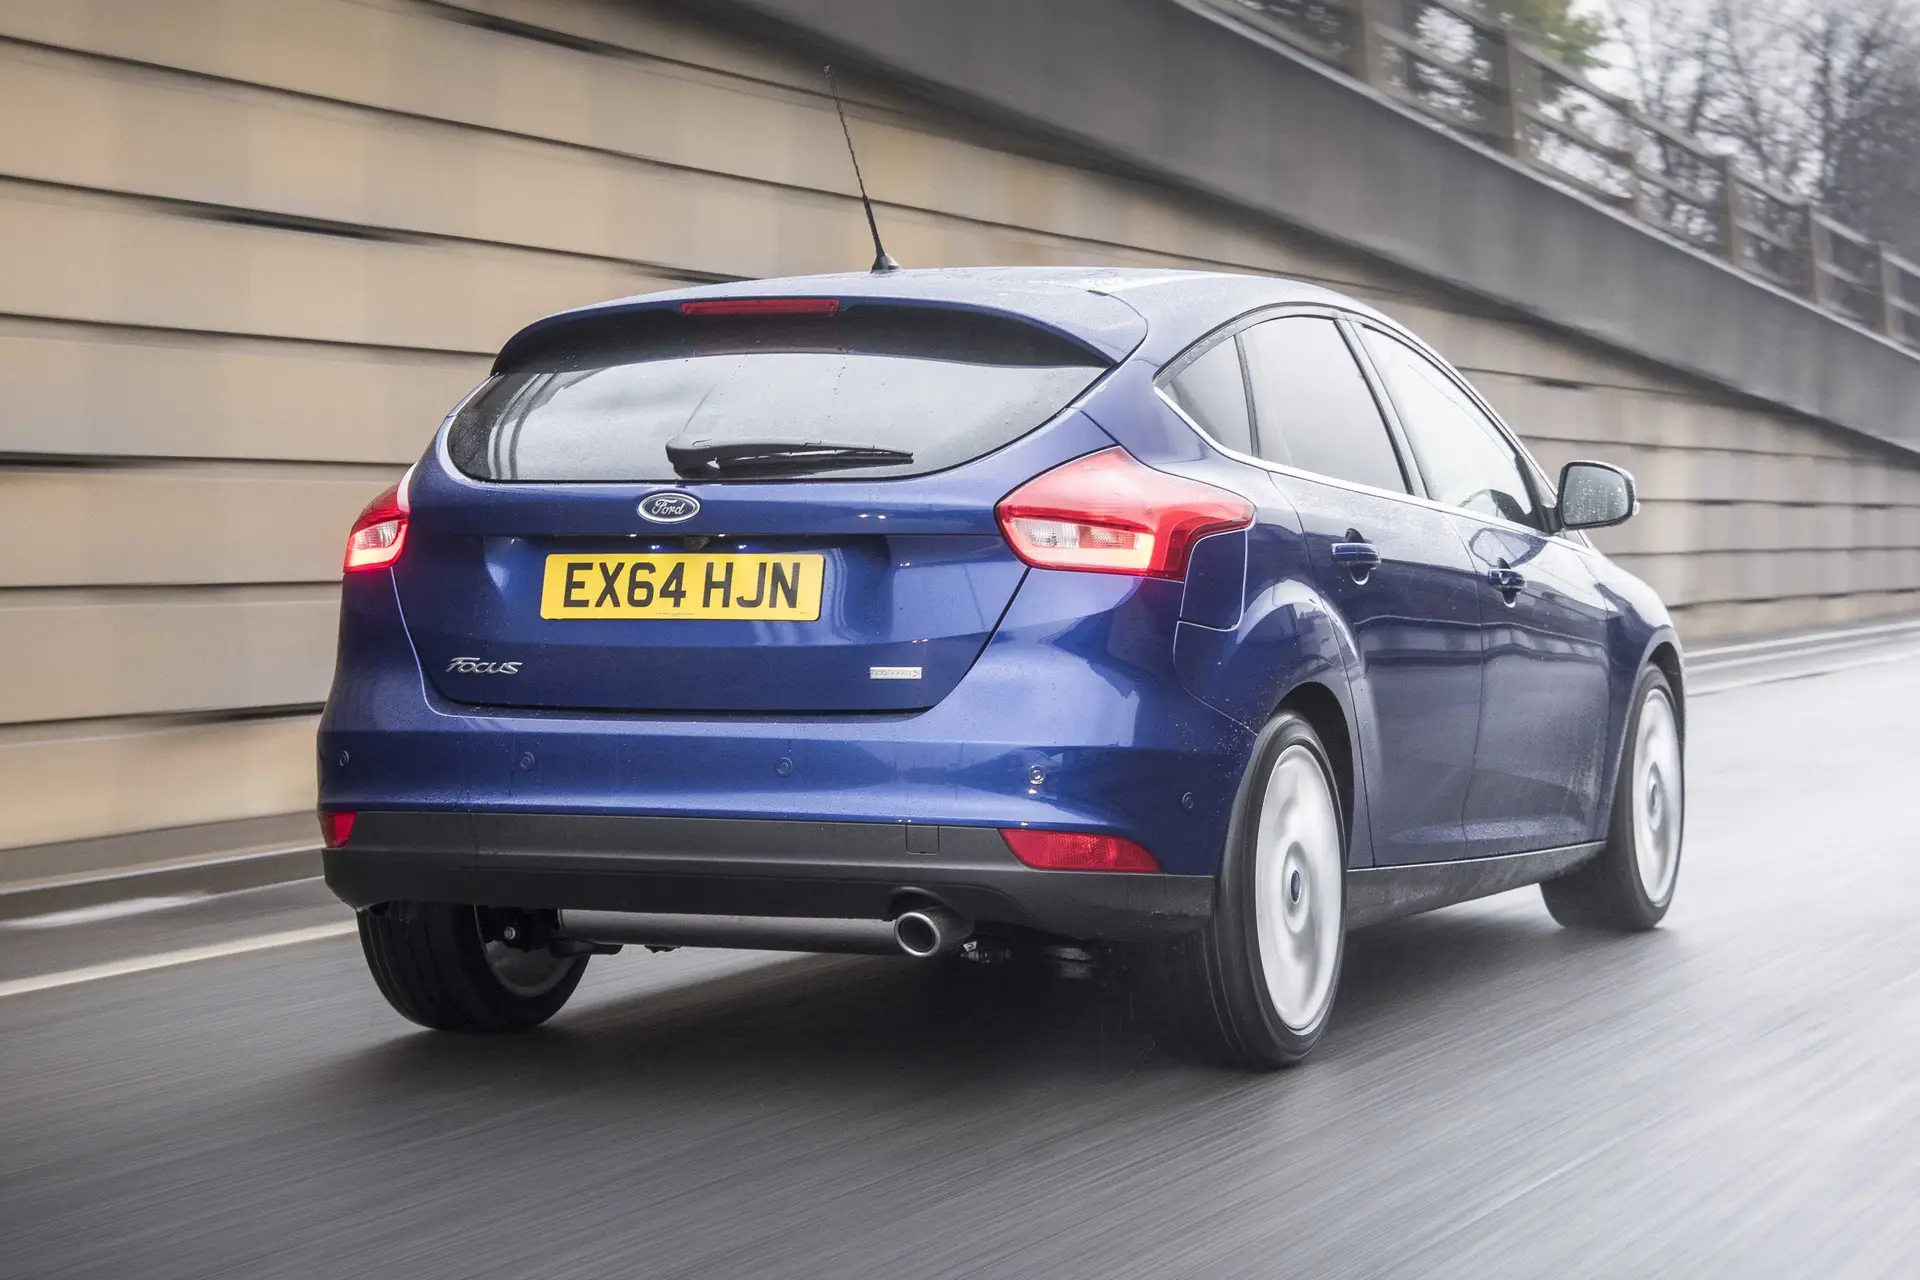 Ford Focus (2014-2018) Review: exterior rear three quarter photo of the Ford Focus on the road